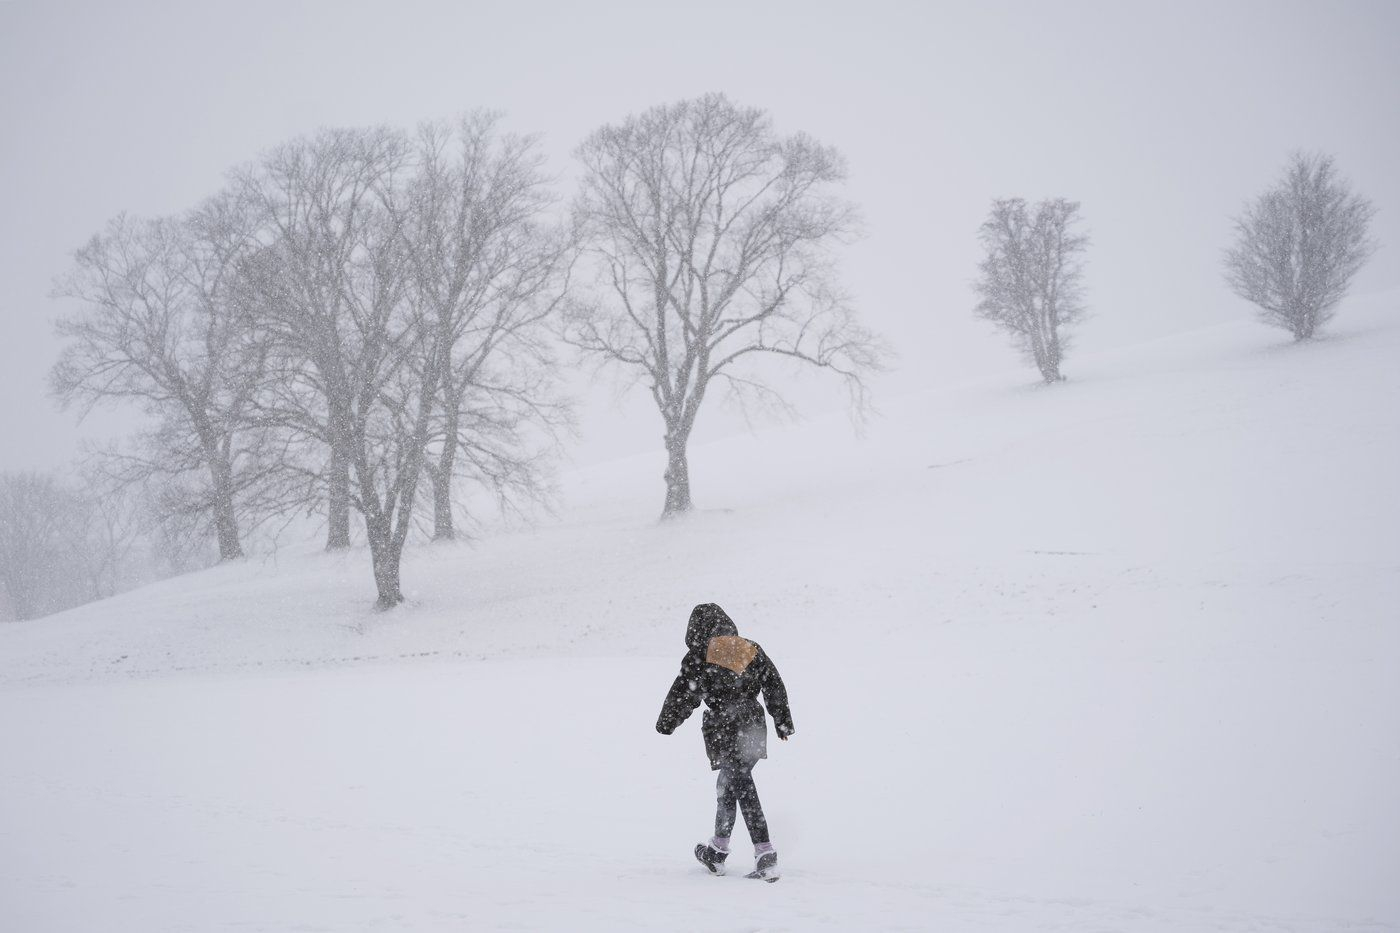 Surprise? Not. Weather Network forecasts delayed spring